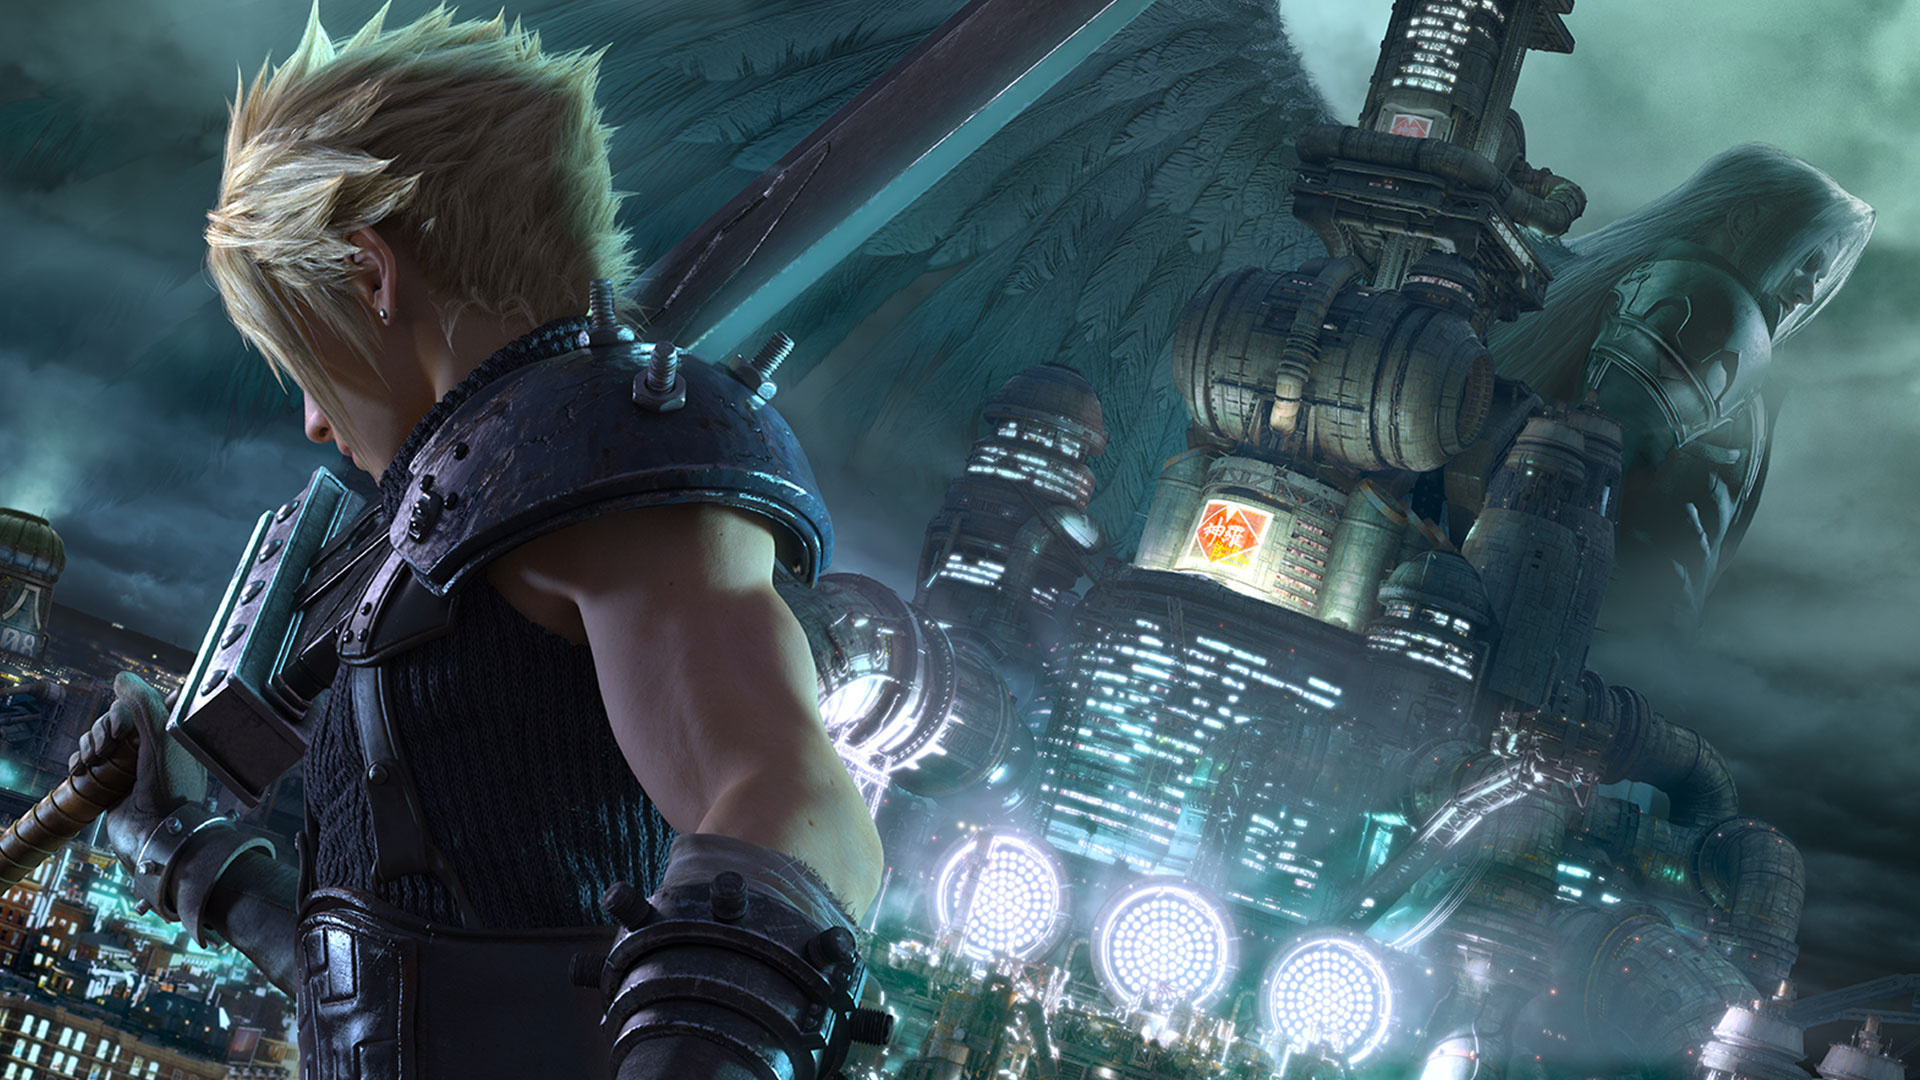 final-fantasy-vii-remake-demo-file-size-revealed-features-first-full-bombing-run-is-around-an